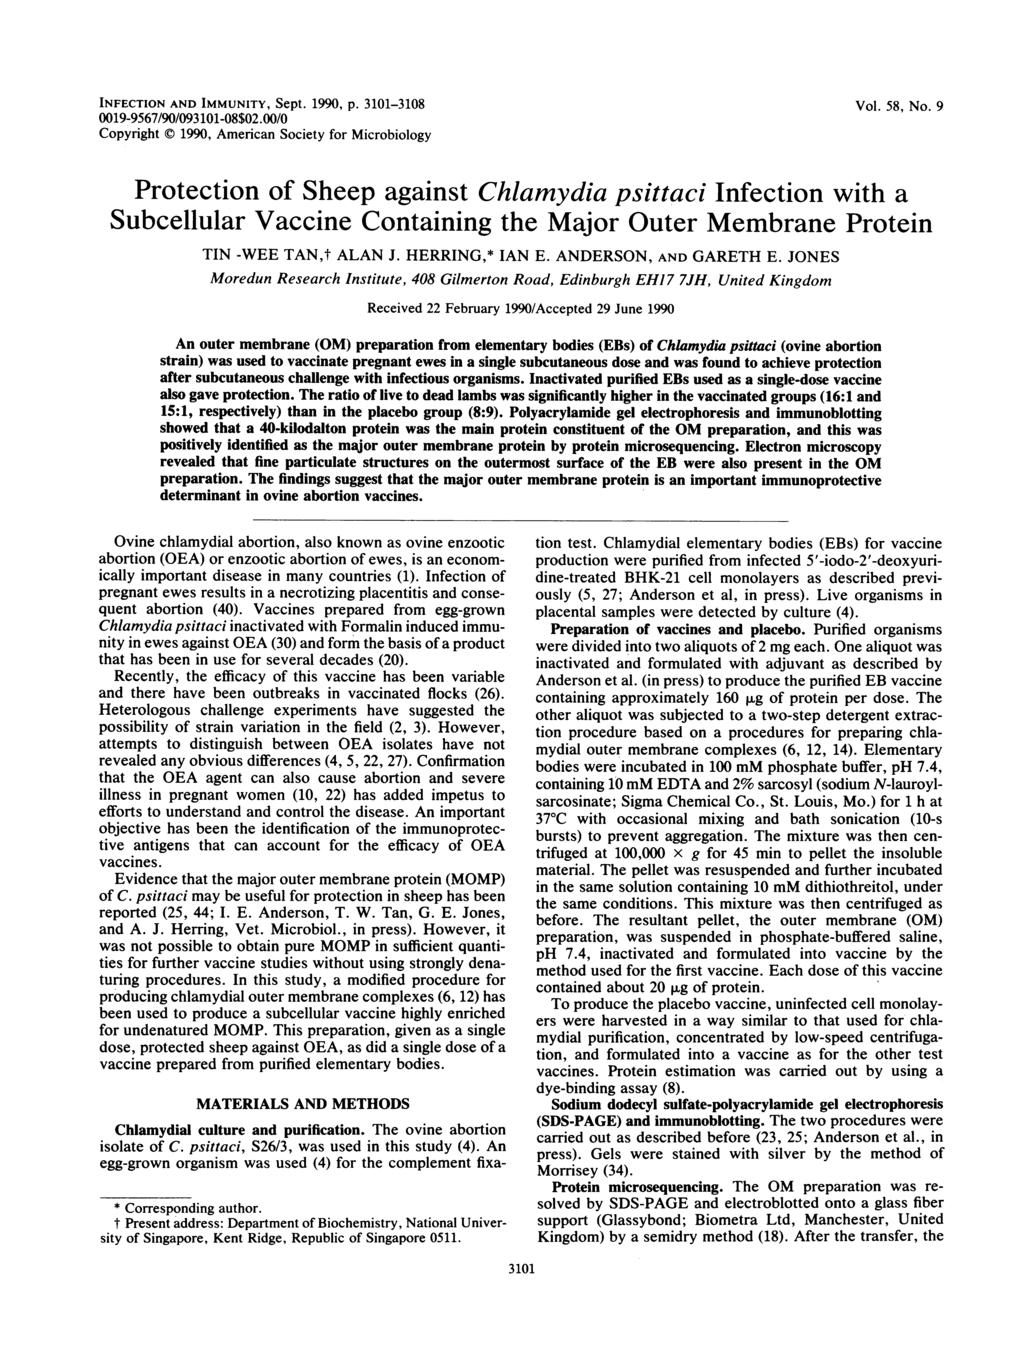 INFECTION AND IMMUNITY, Sept. 1990, p. 3101-3108 0019-9567/90/093101-08$02.00/0 Copyright X) 1990, Americn Society for Microbiology Vol. 58, No.